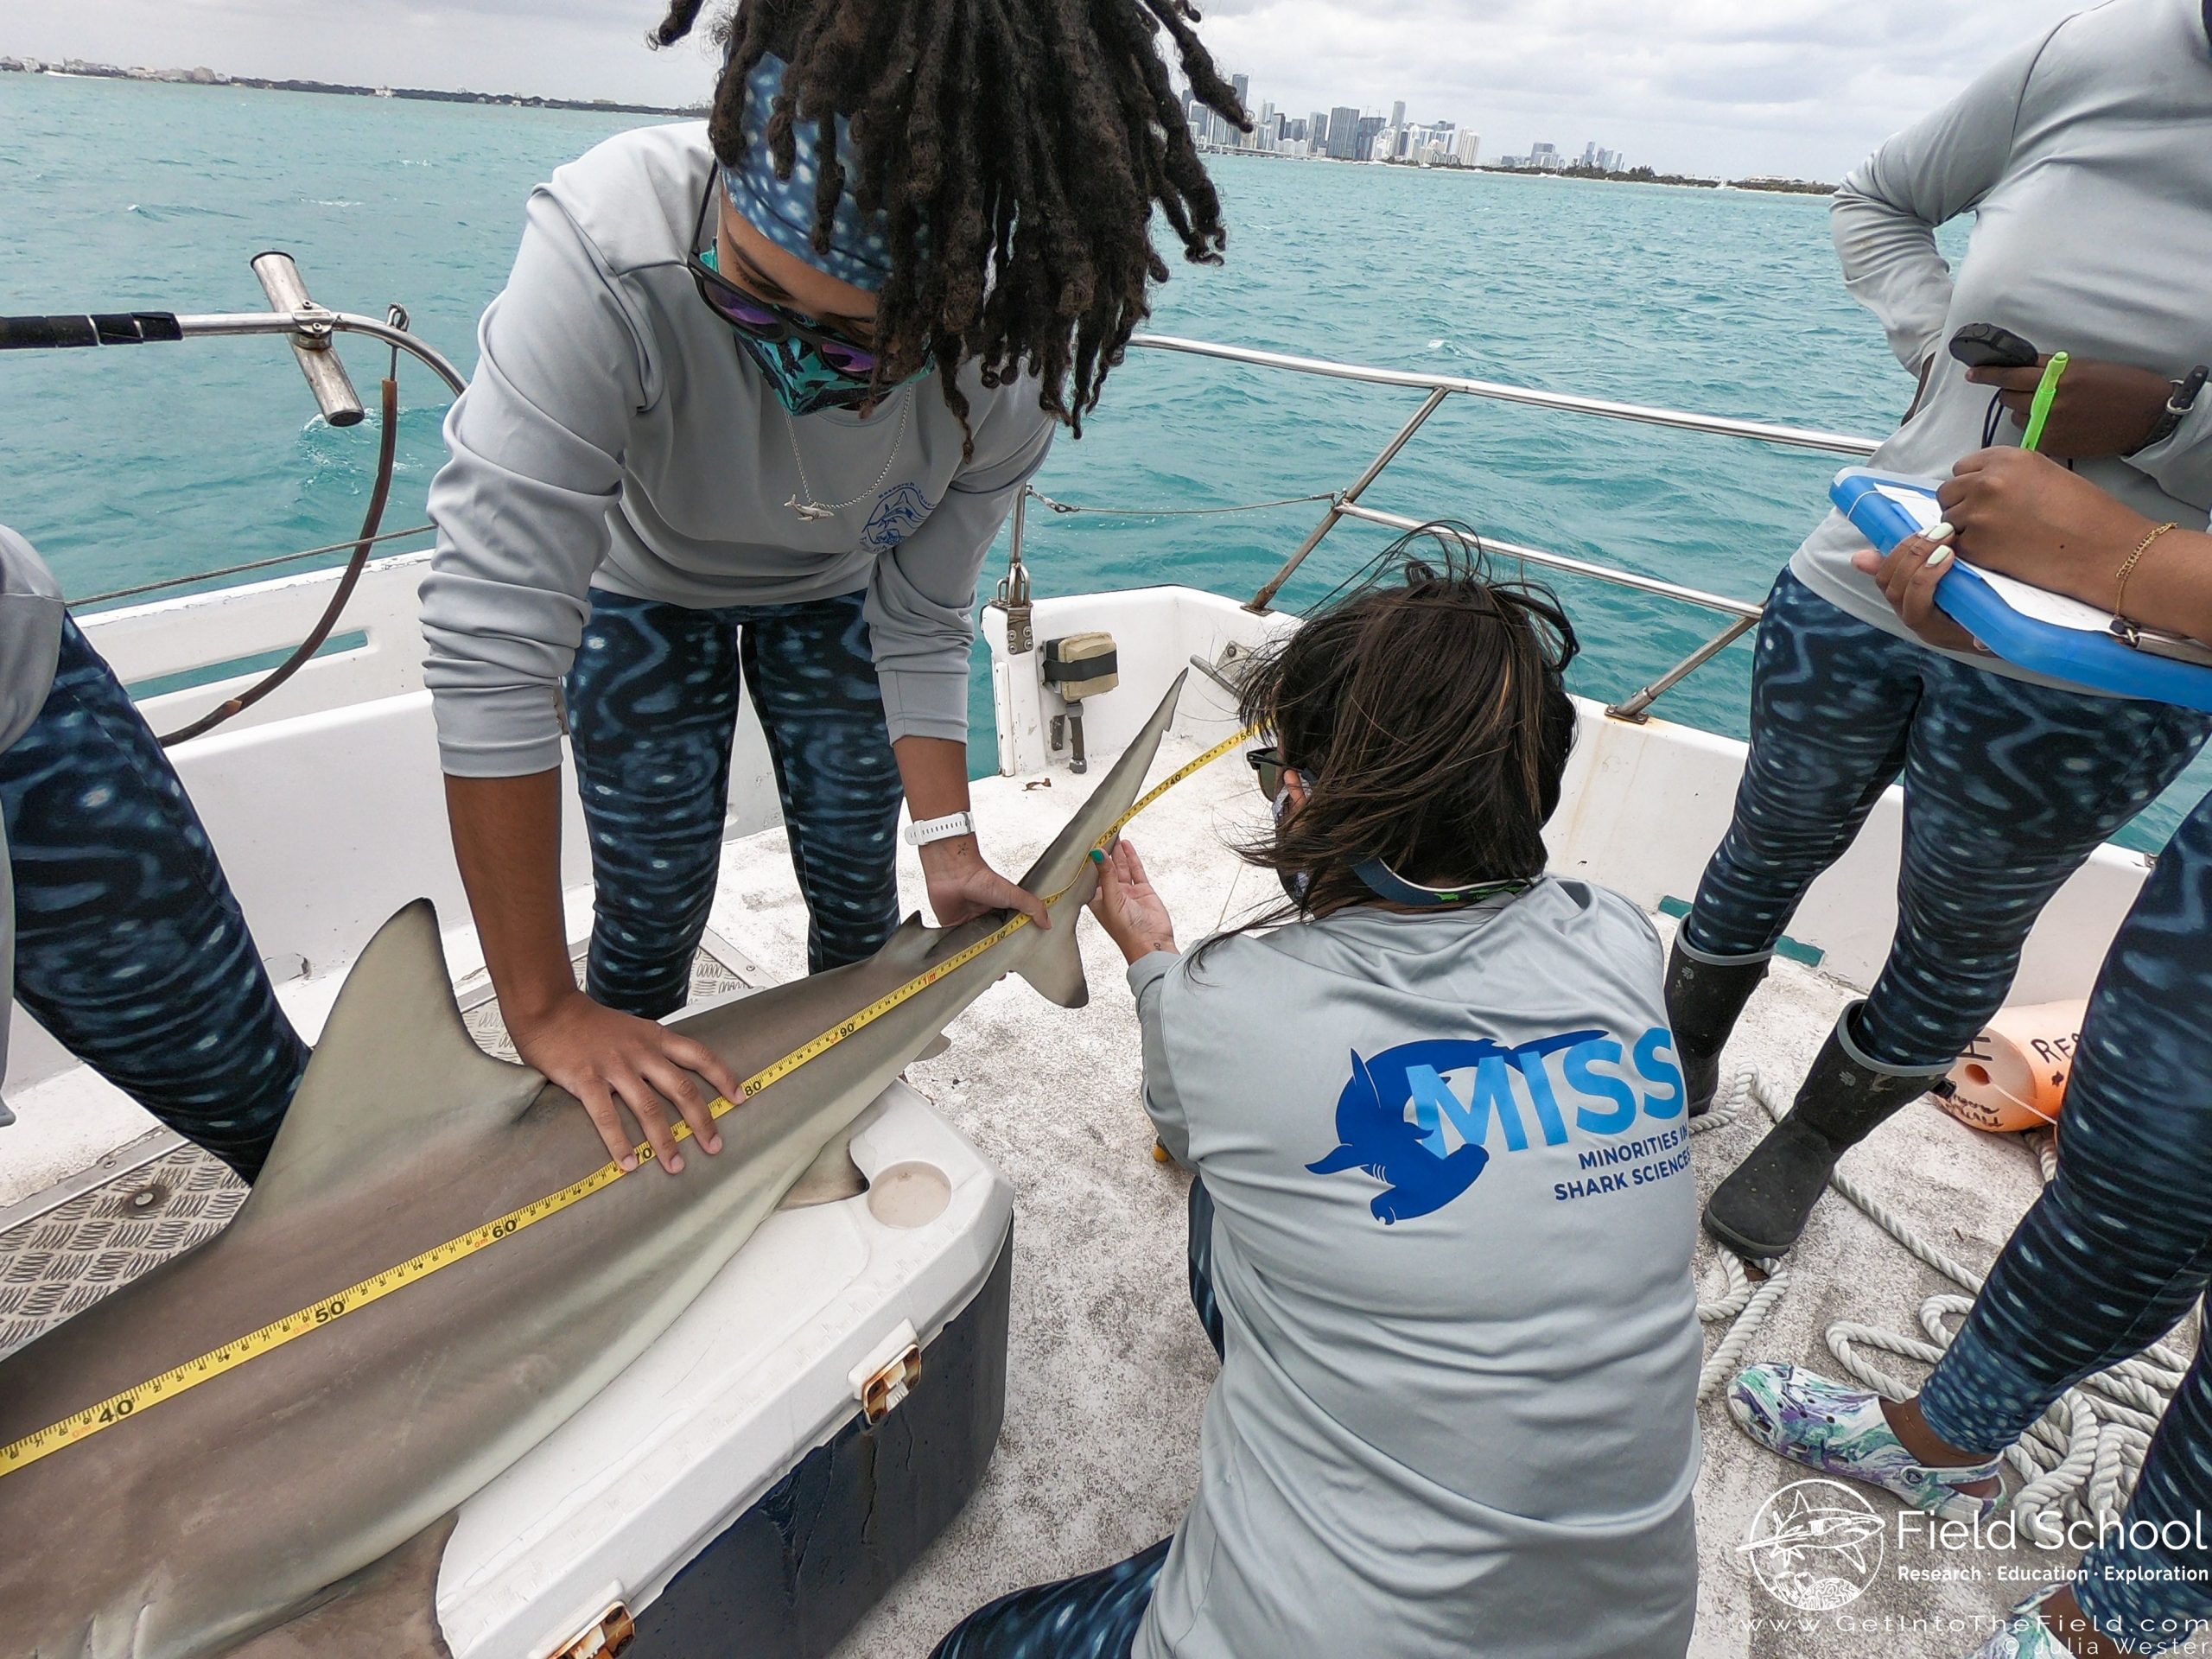 Jaida Elcock (standing) restrains a blacktip shark while a MISS workshop participant measures it. (Image courtesy of Field School, Miami, Florida.)